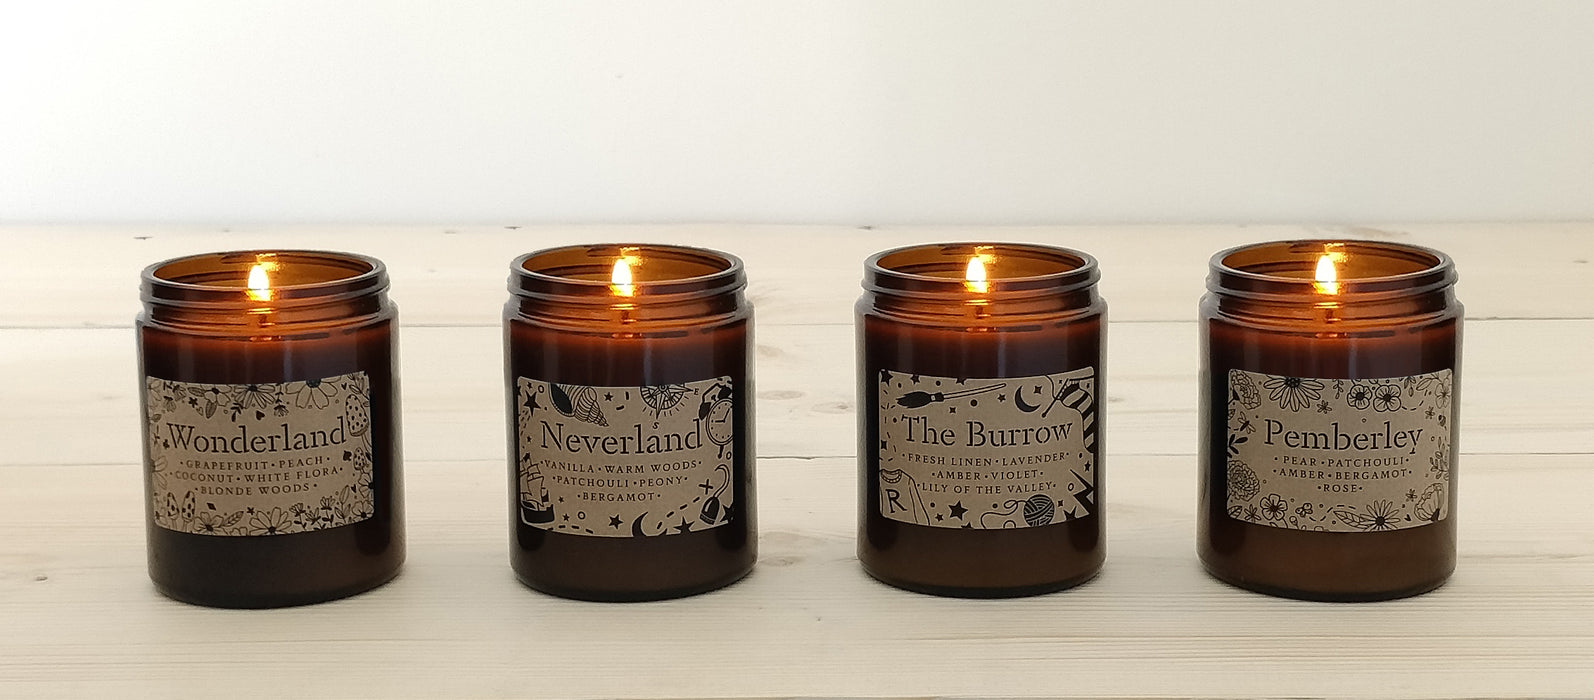 ‘The Burrow’ Book Lover Vegan Candle | 50 Hour Burn Time